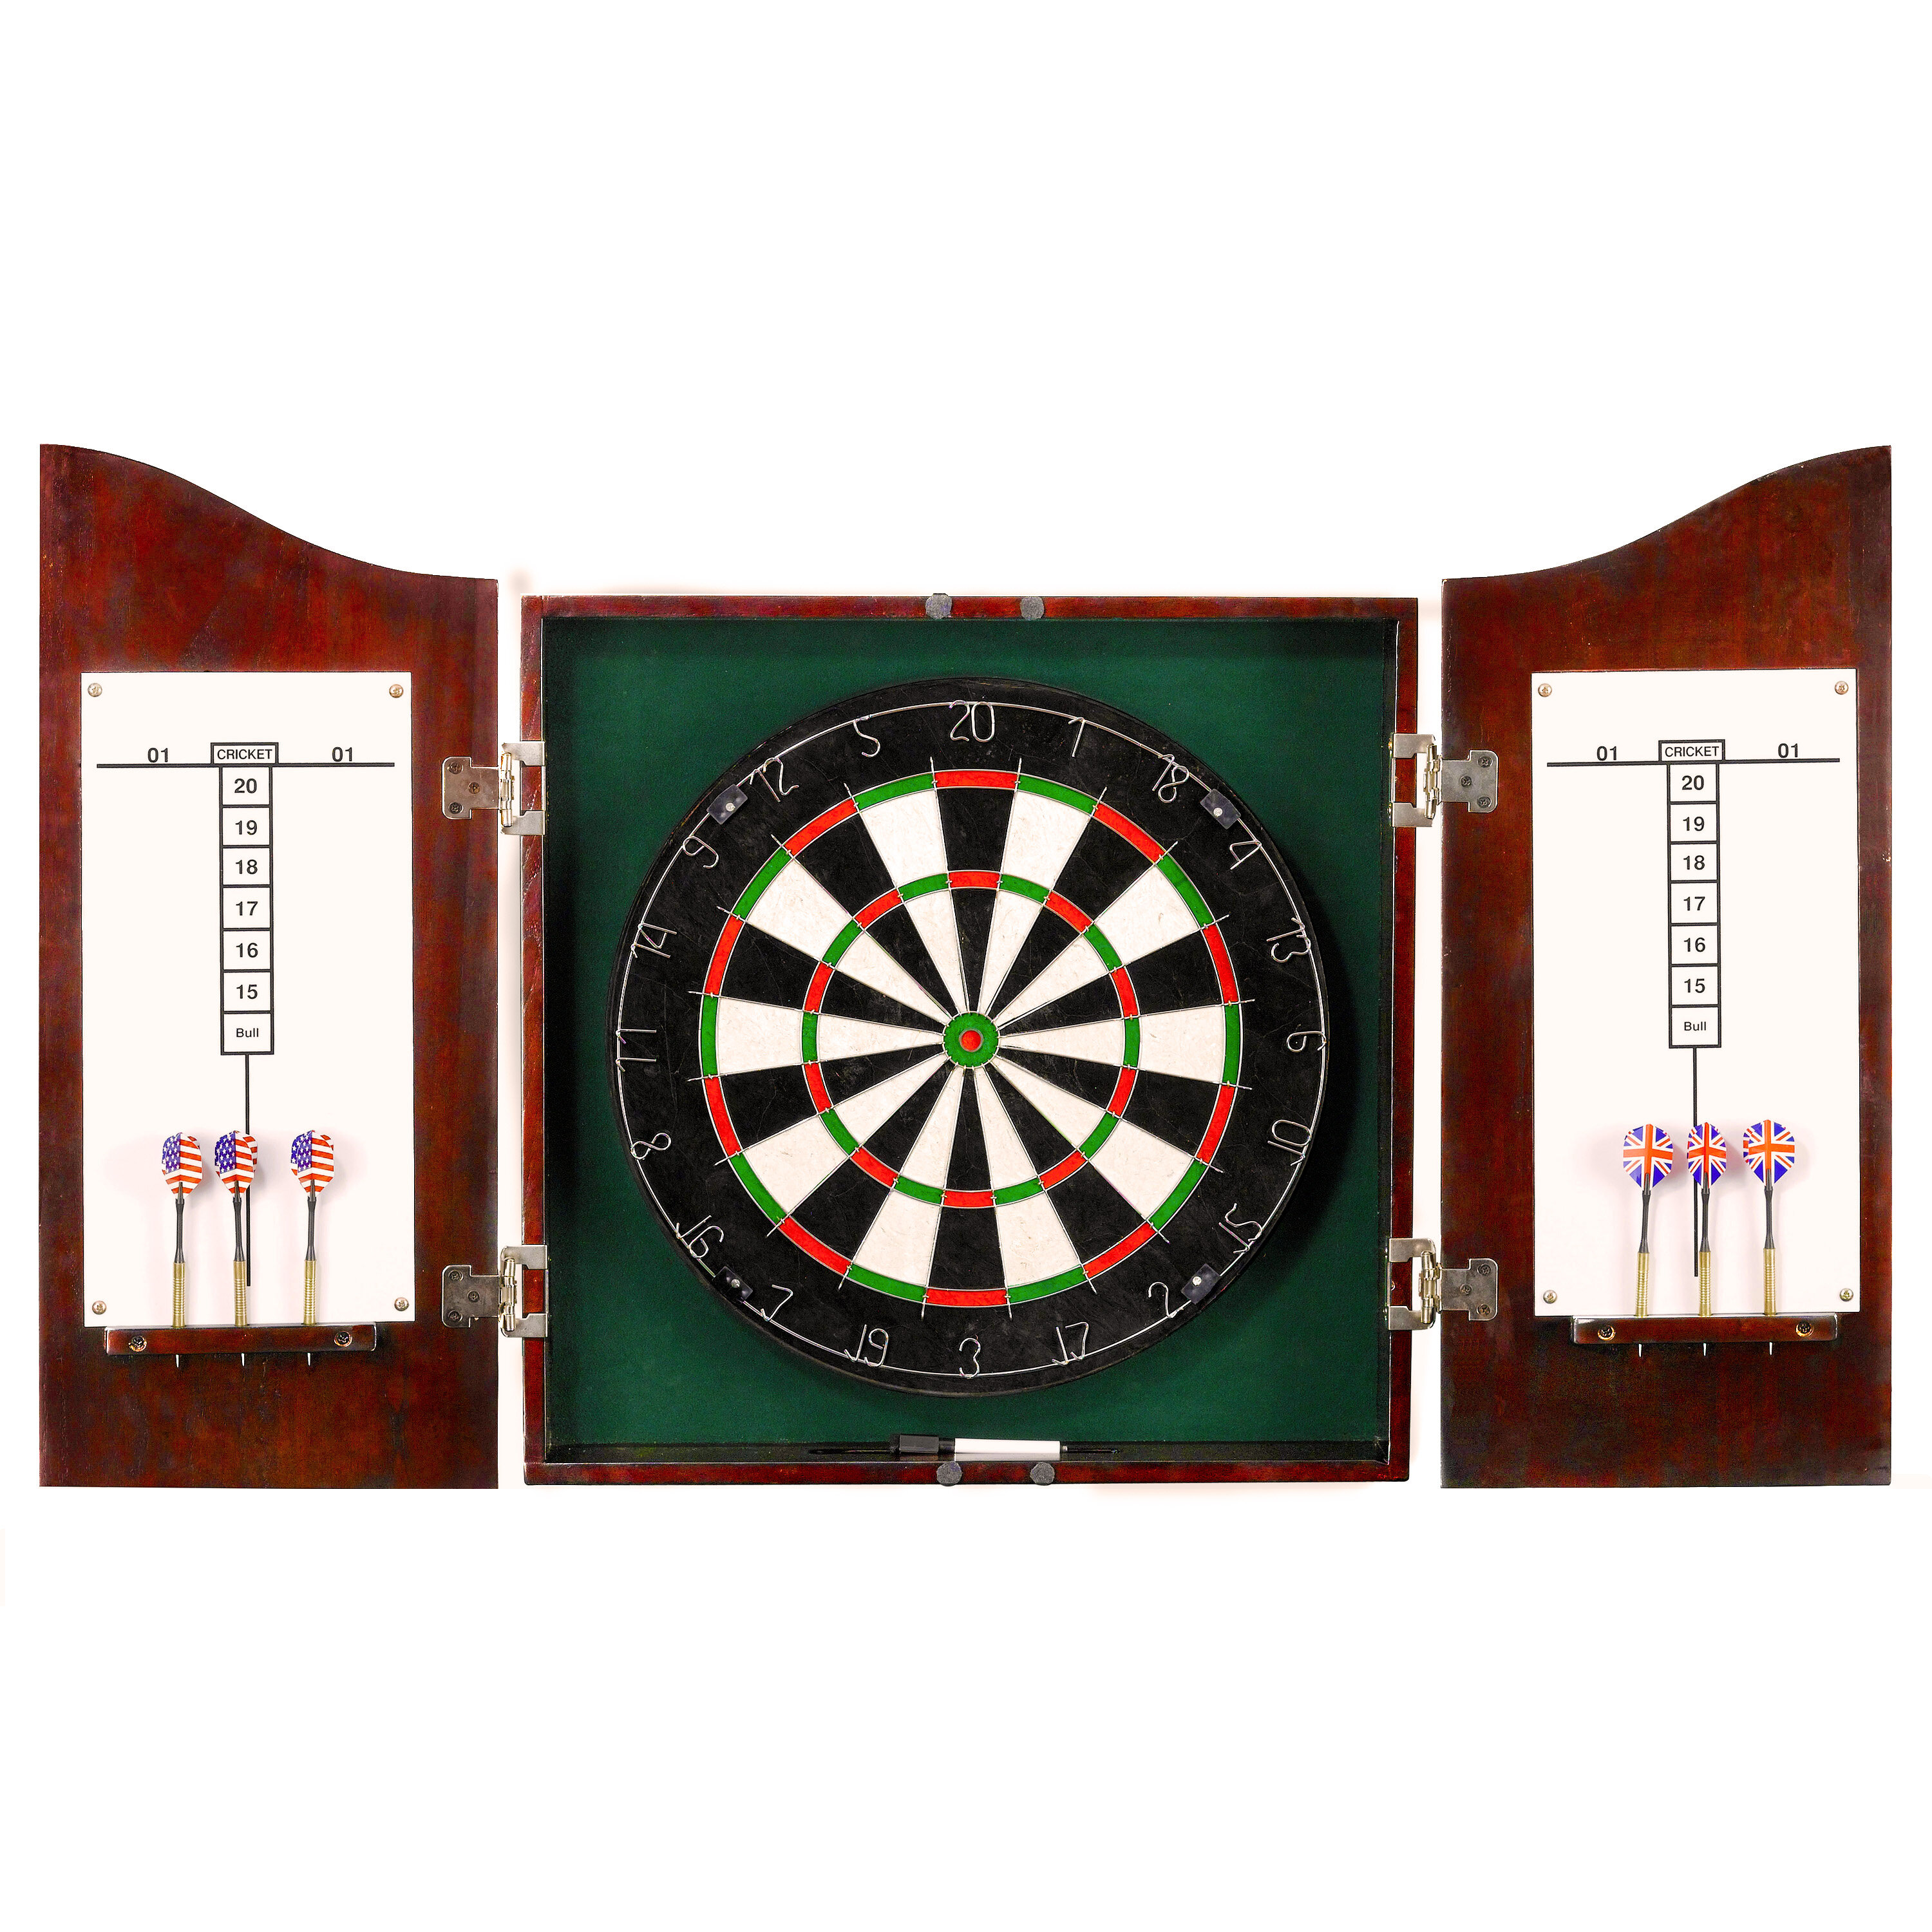 Hathaway Games Centerpoint Solid Wood Sisal Dartboard Cabinet